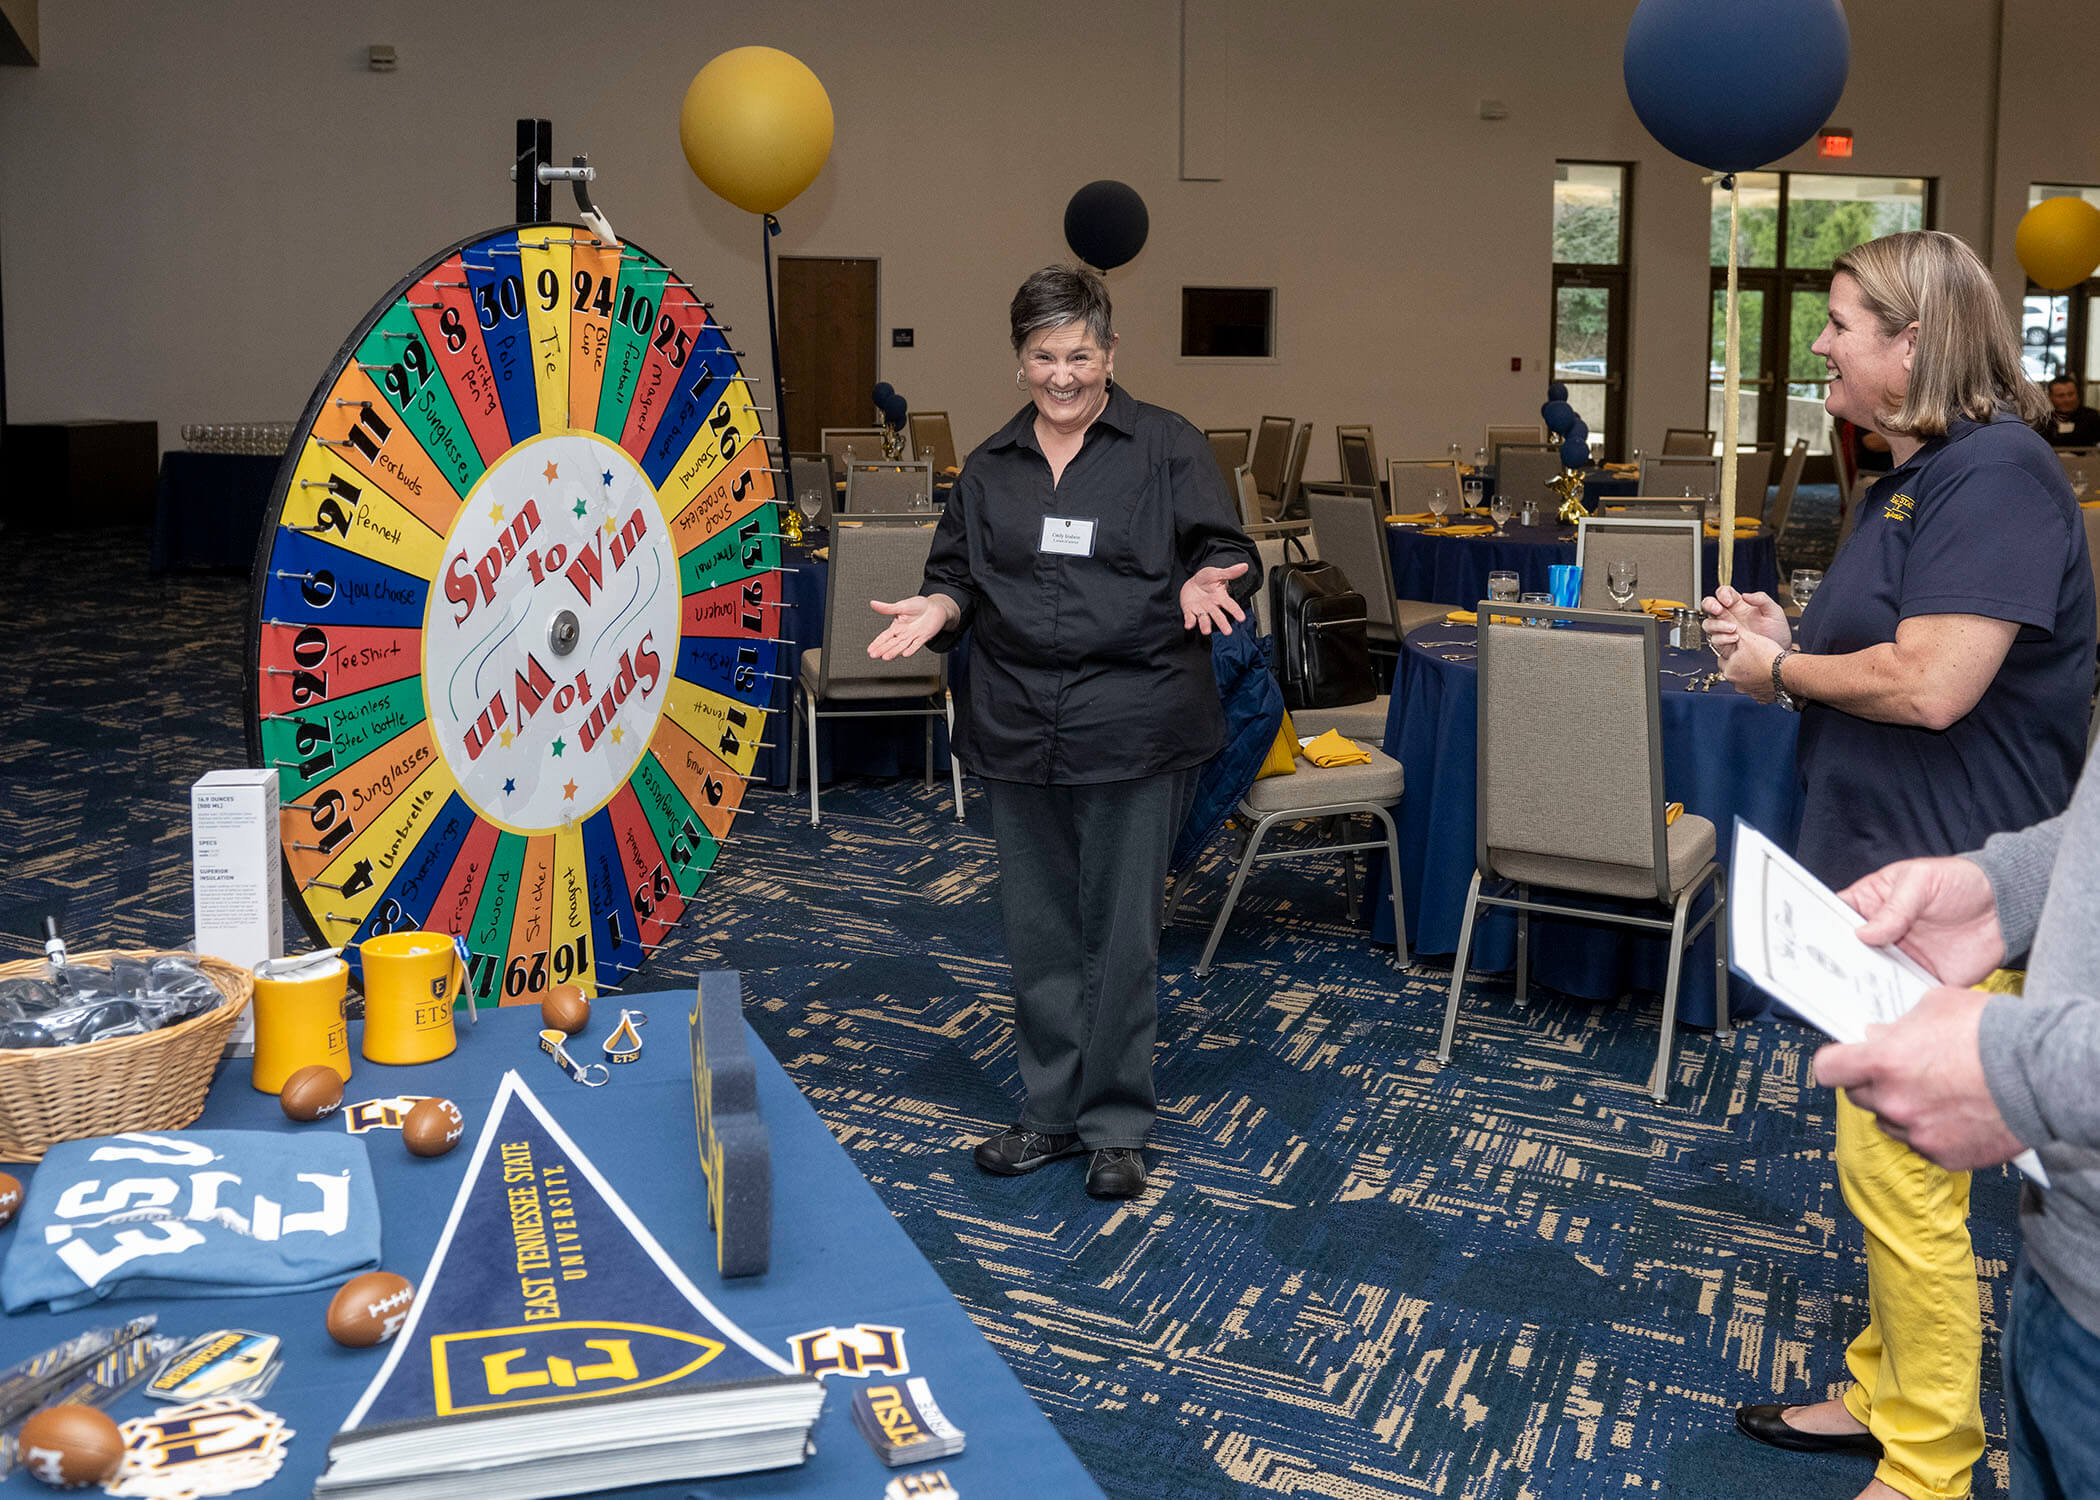 A staff member encourages another employee to spin the wheel to win a prize.